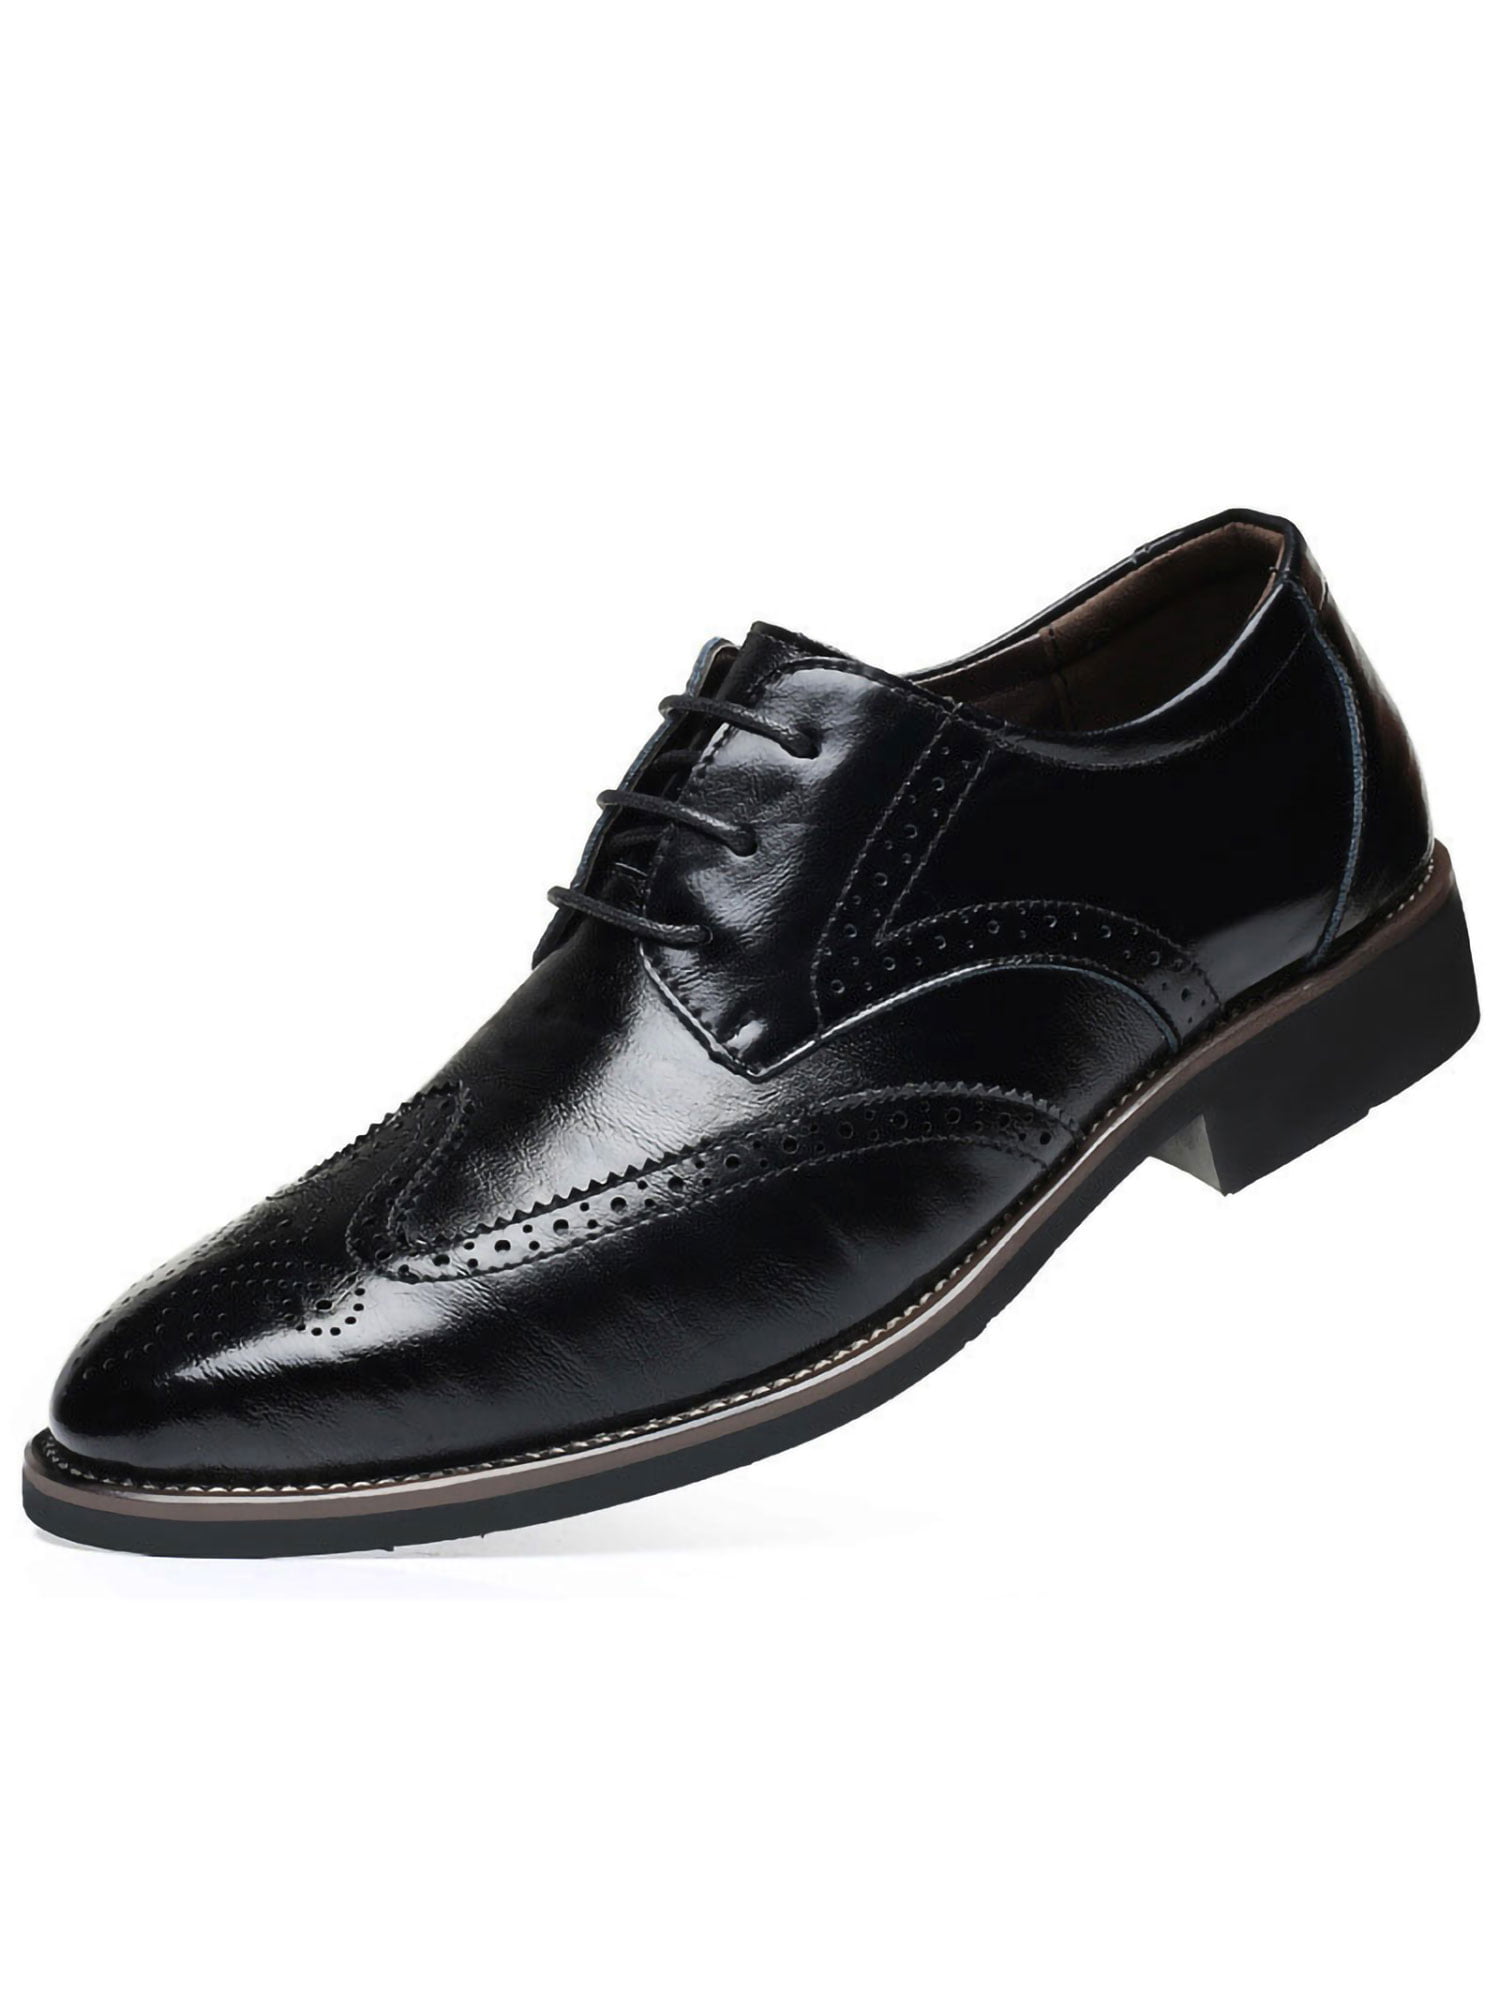 Details about   Mens Faux Leather Brogue Oxfords Formal Dress Business Work Wedding Casual Shoes 